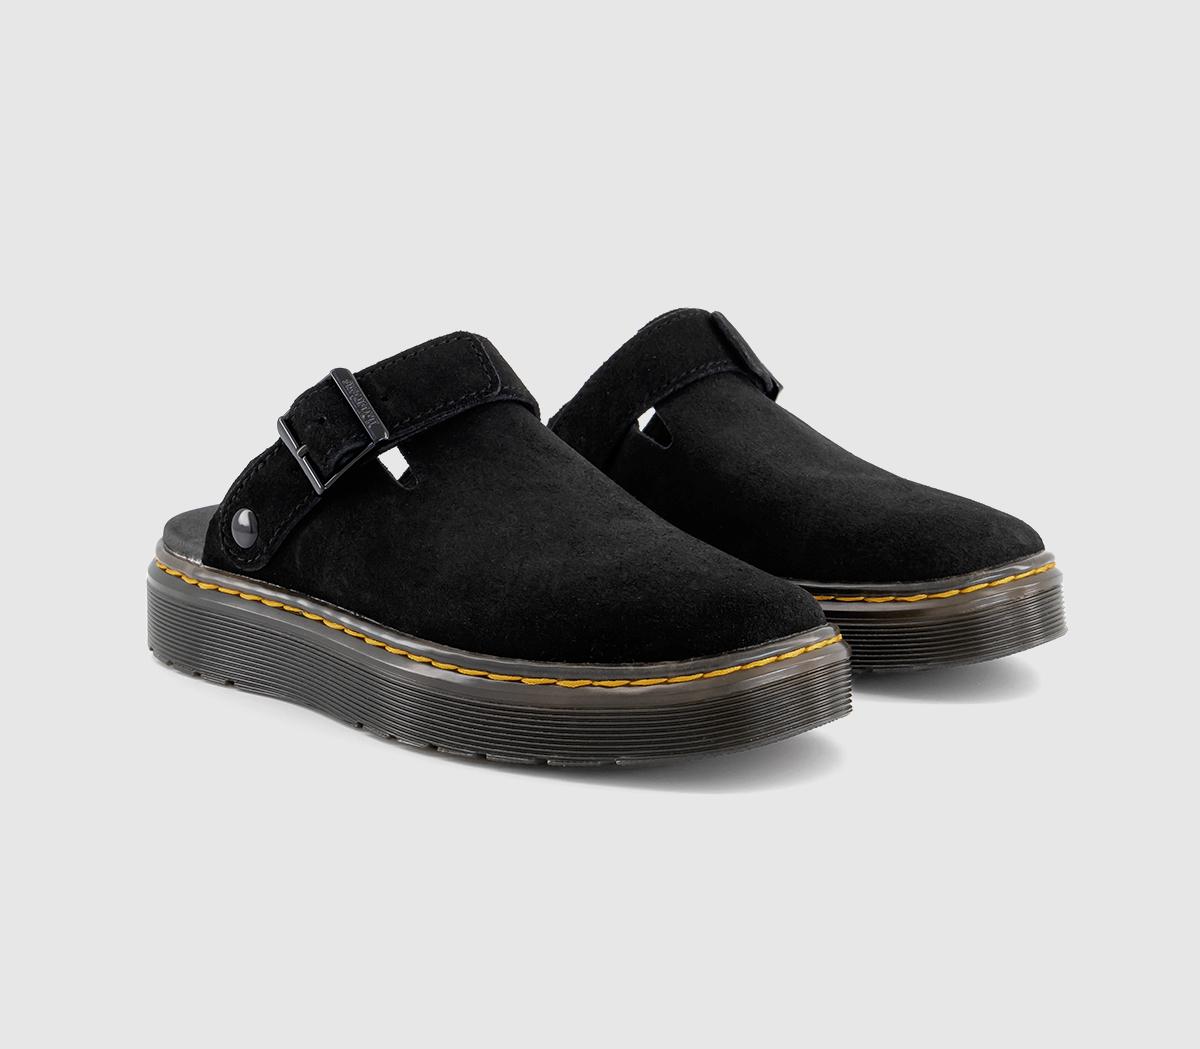 Dr. Martens Womens Carlson Mules Black Suede, 8